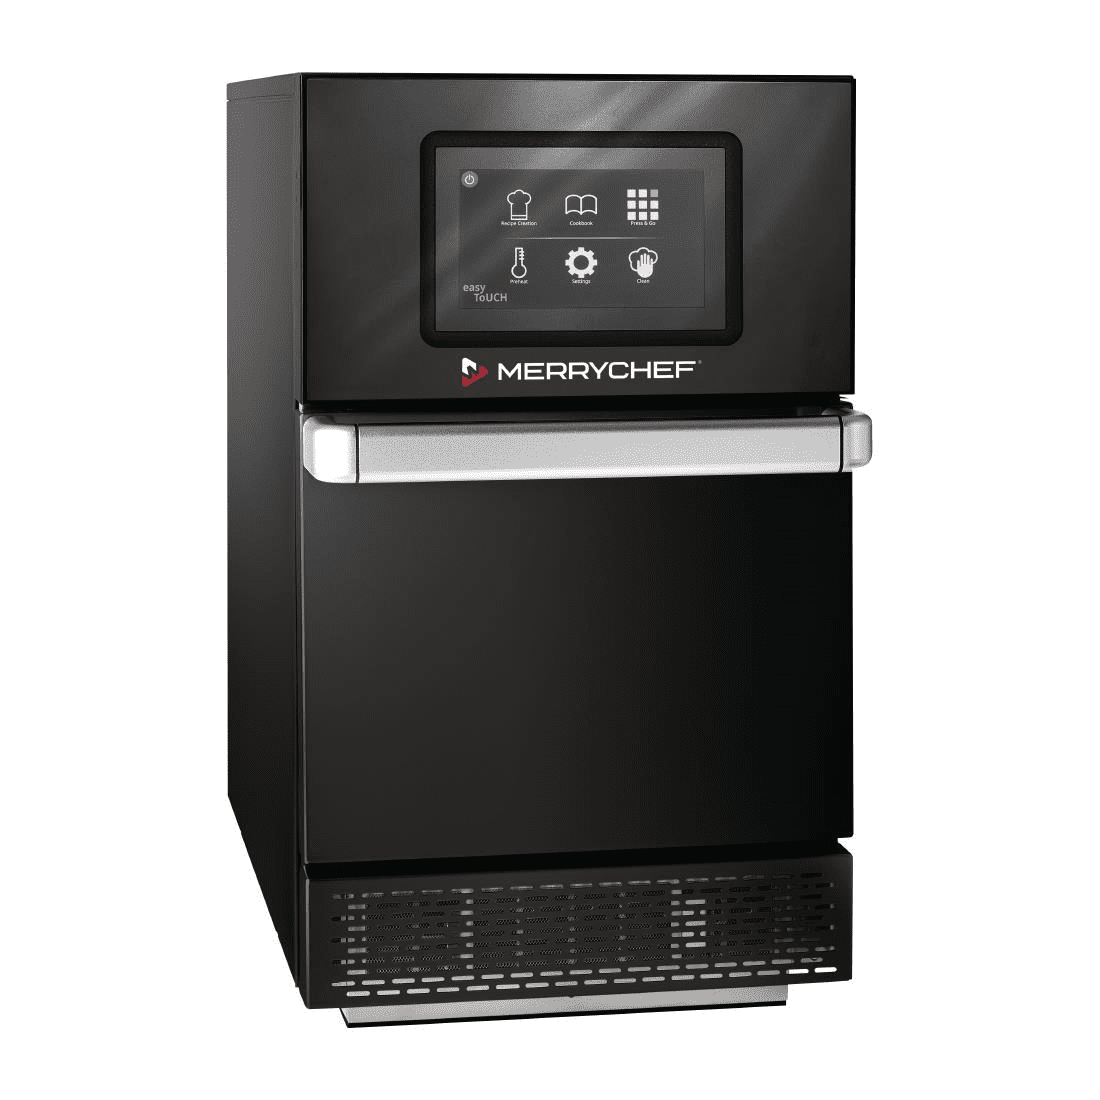 CH894 Merrychef Connex 12 Accelerated High Speed Oven Black Single Phase 13A